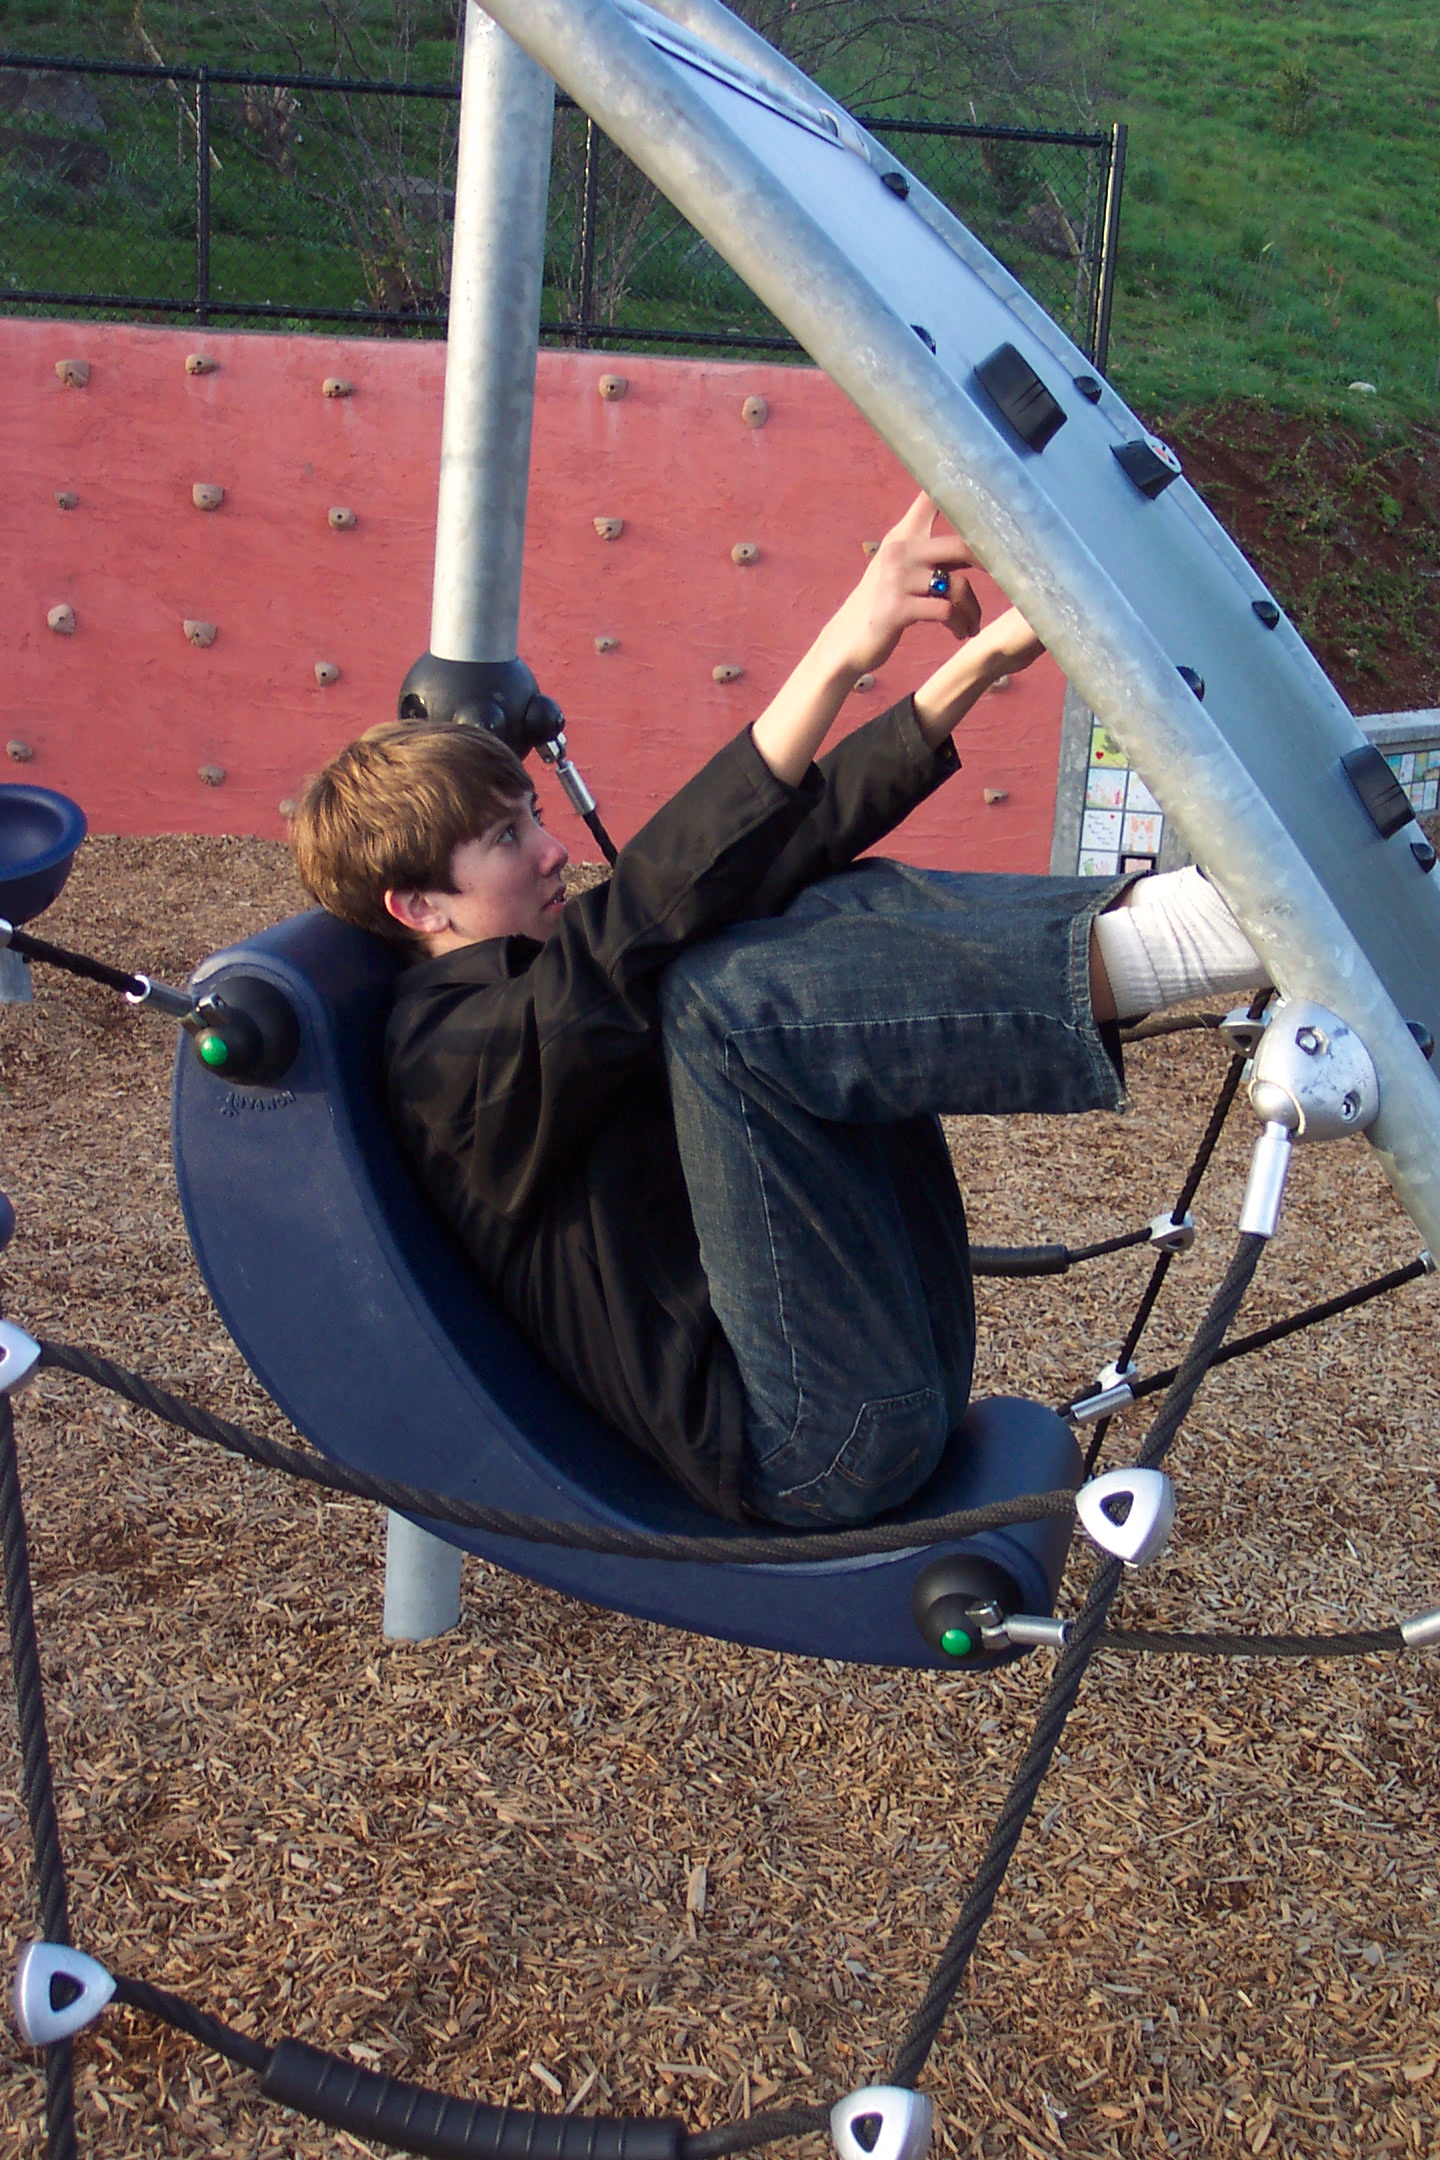 a  is riding on a playground swing